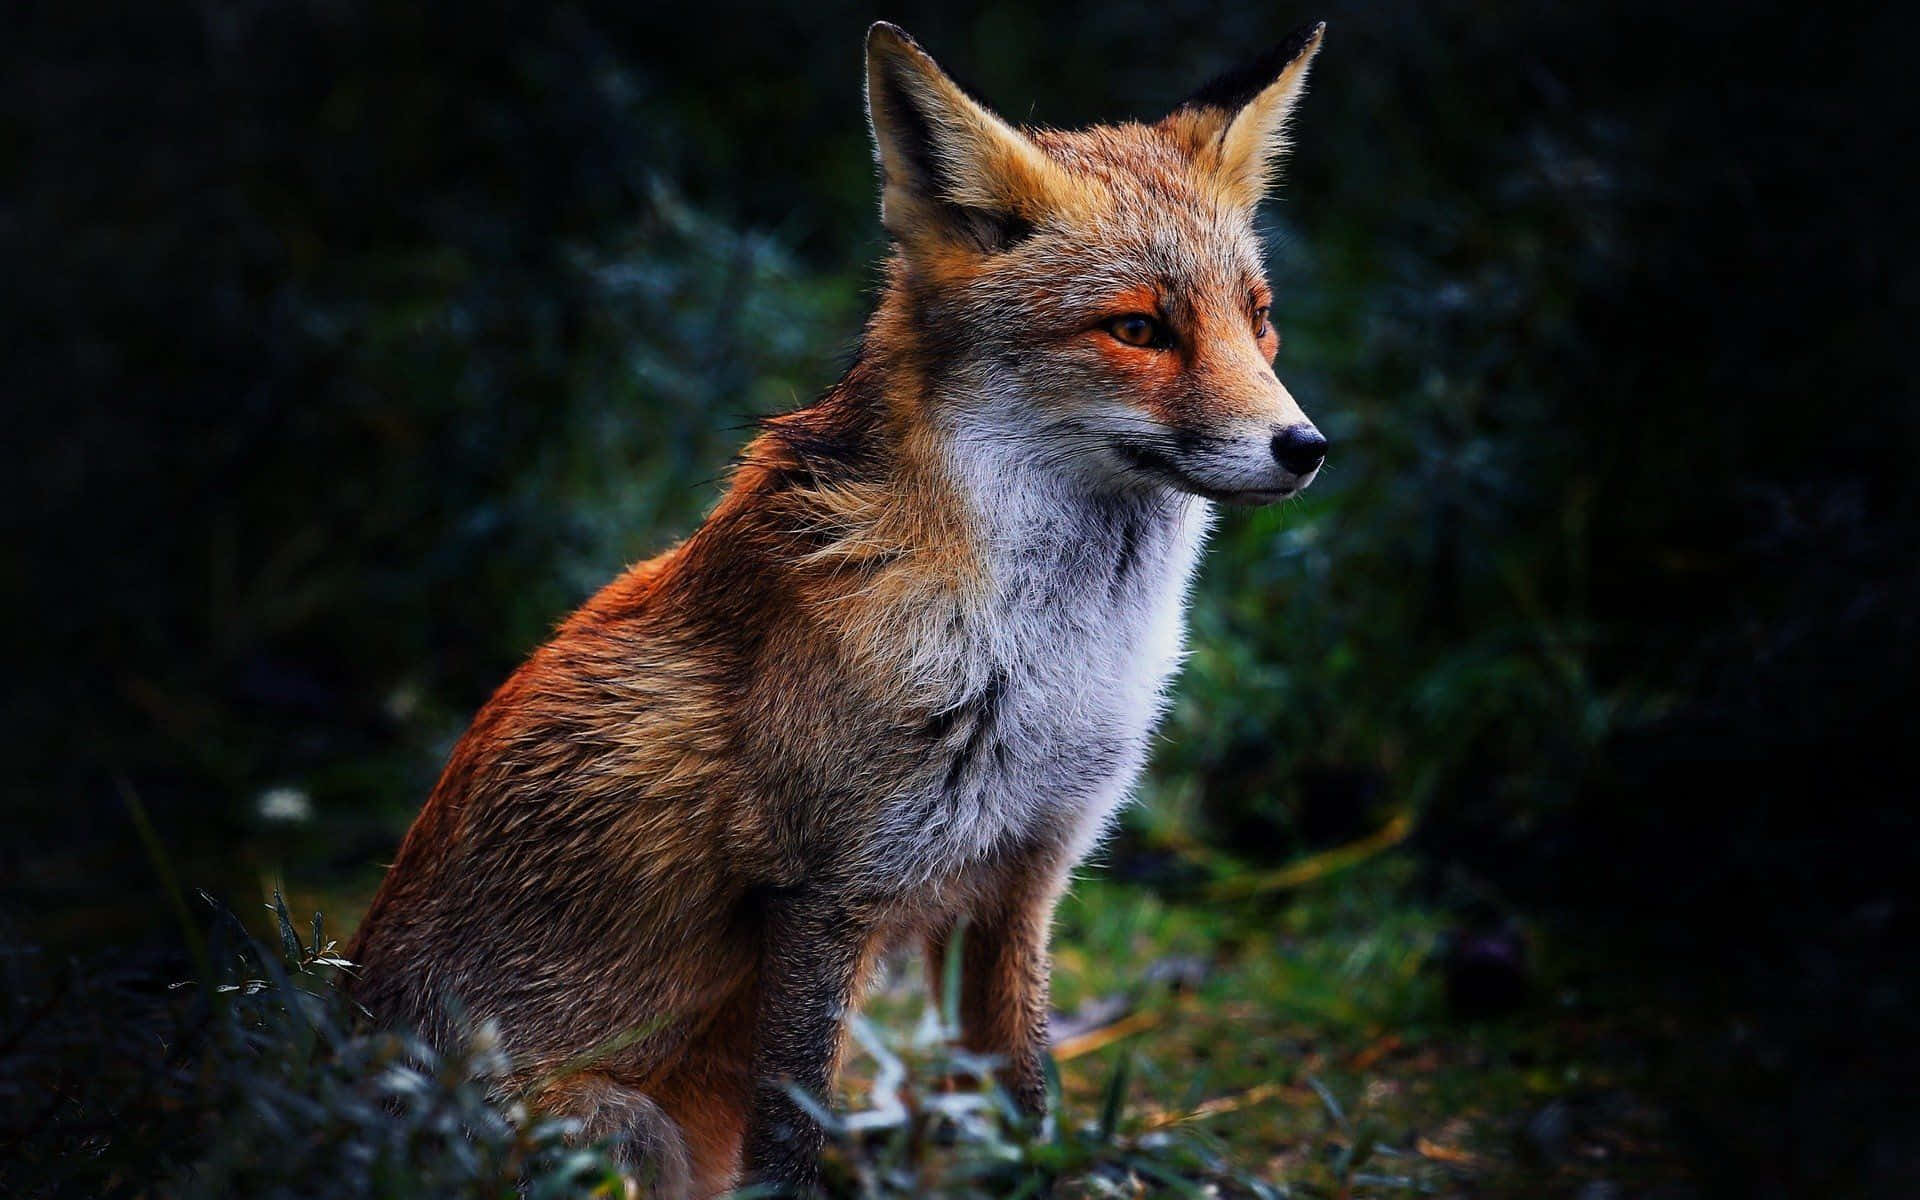 A close-up of a beautiful fox in its natural environment